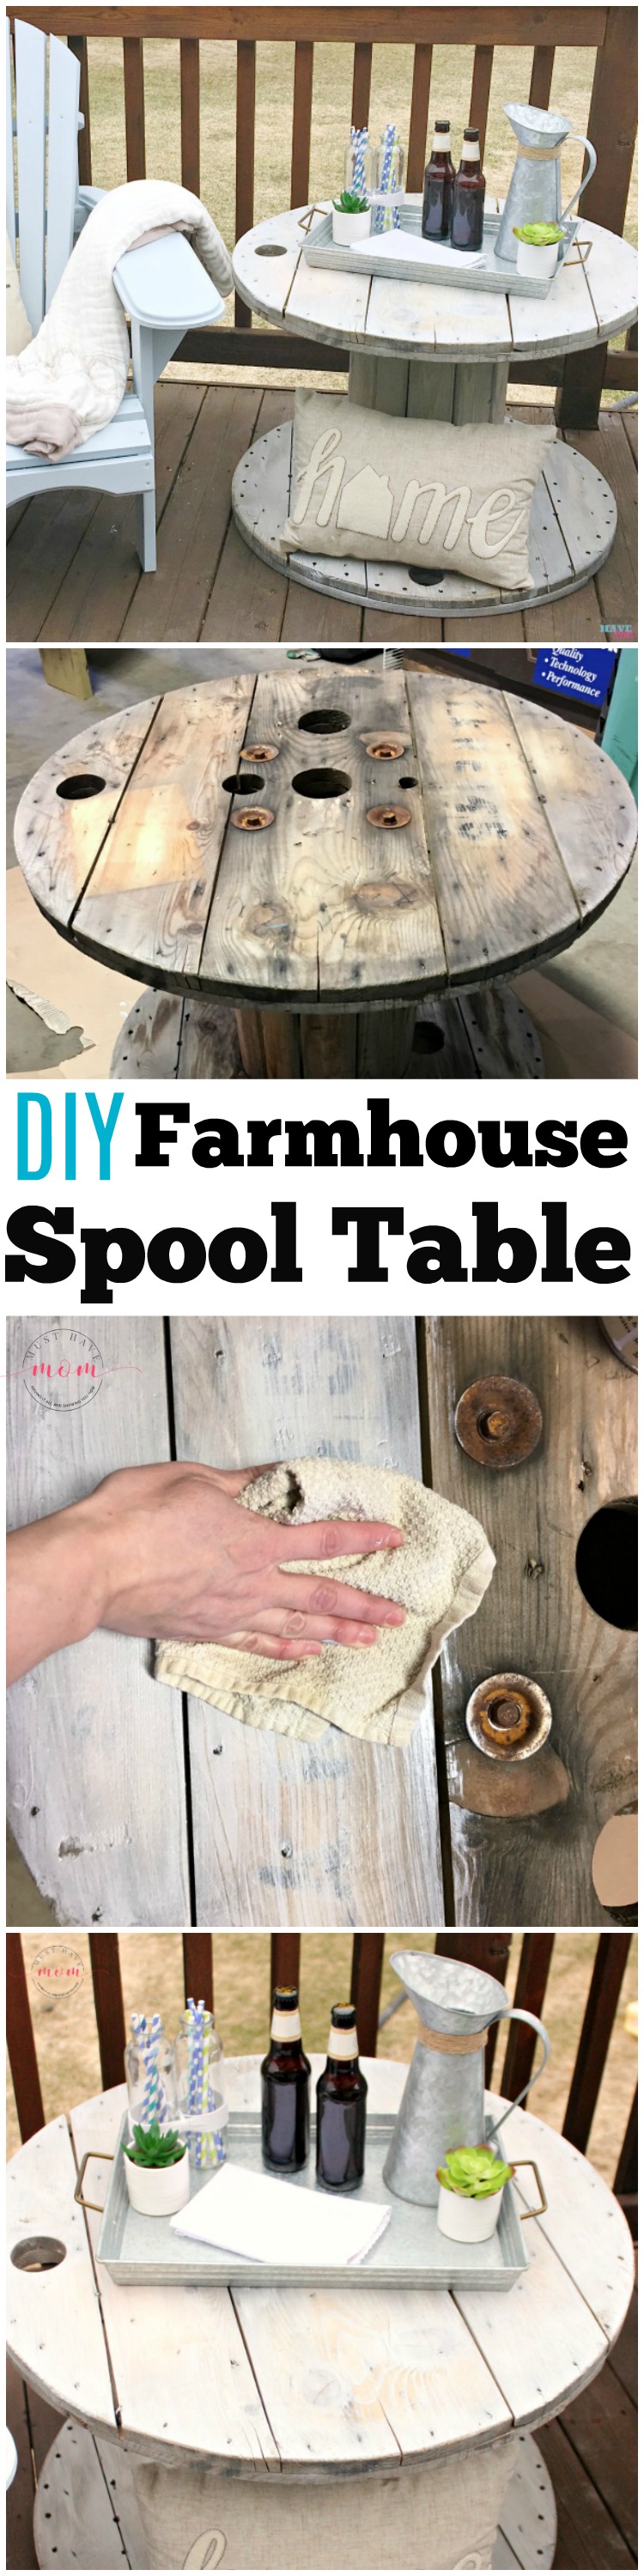 DIY farmhouse style wood spool table ideas. Tutorial to make a side table from a wood cable spool